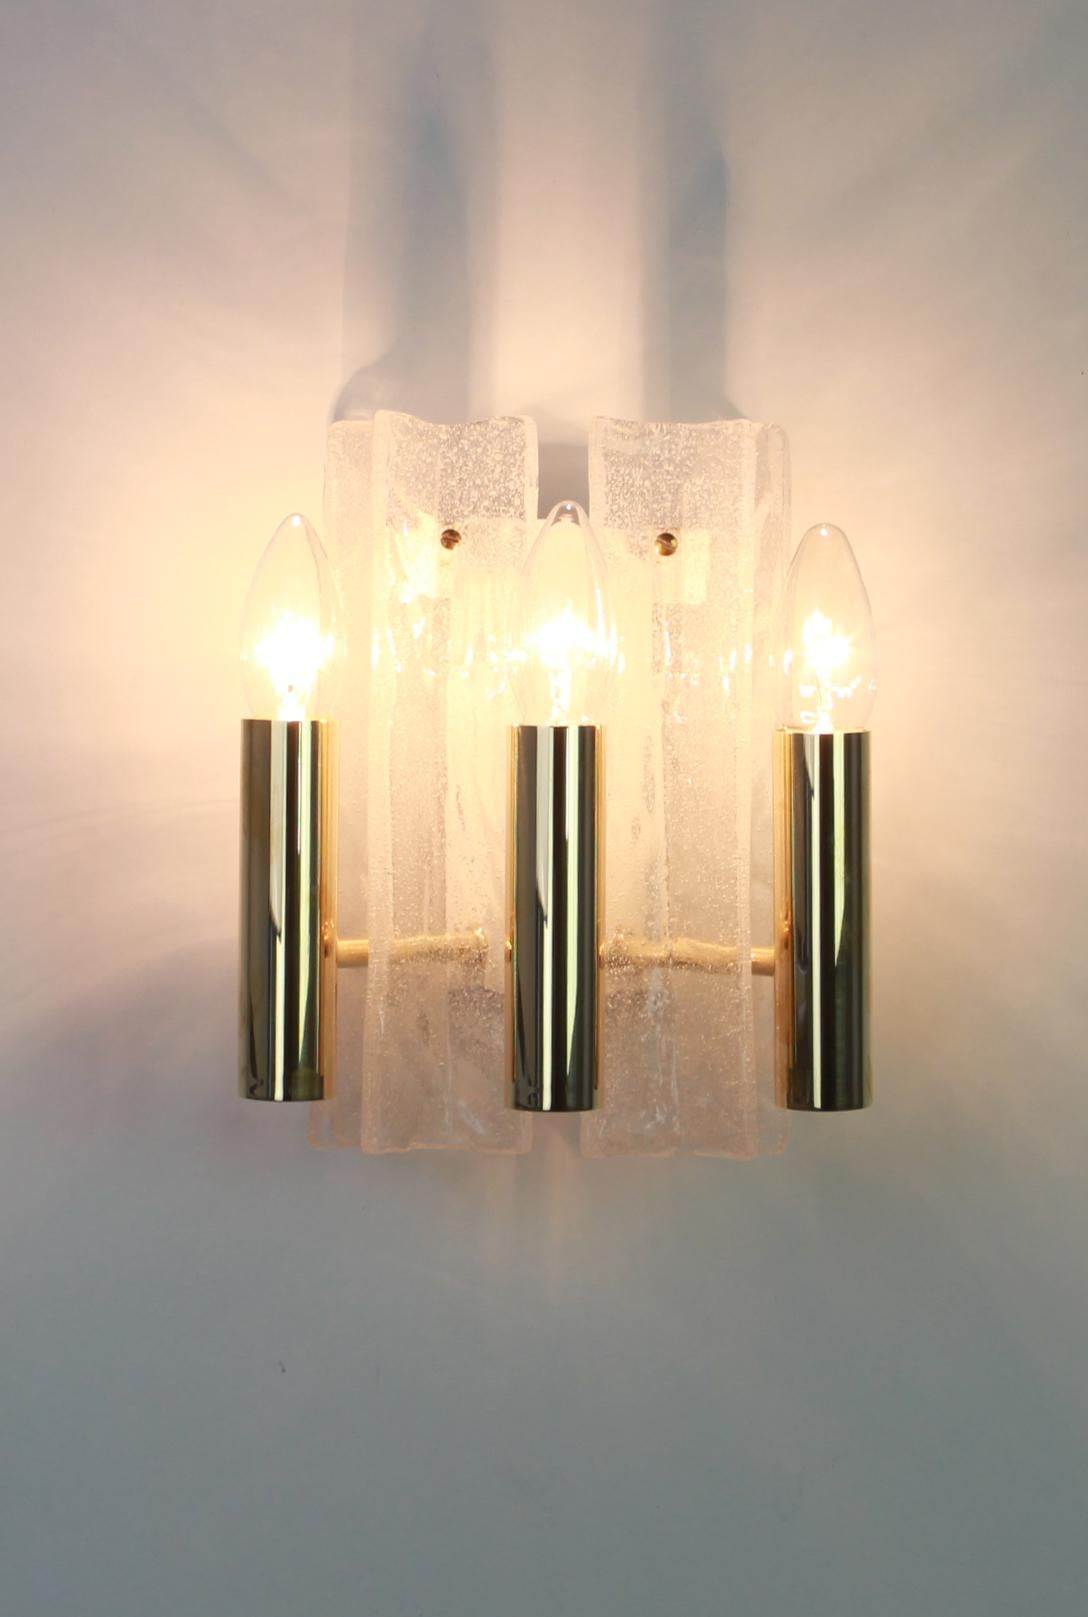 Wonderful pair of midcentury wall sconces with 4 Murano ice glass pieces, made by Kalmar, Austria, manufactured, circa 1960-1969.
Serie: Lipizza

Each fixture requires 3 x E14 small bulbs.
Light bulbs are not included. It is possible to install